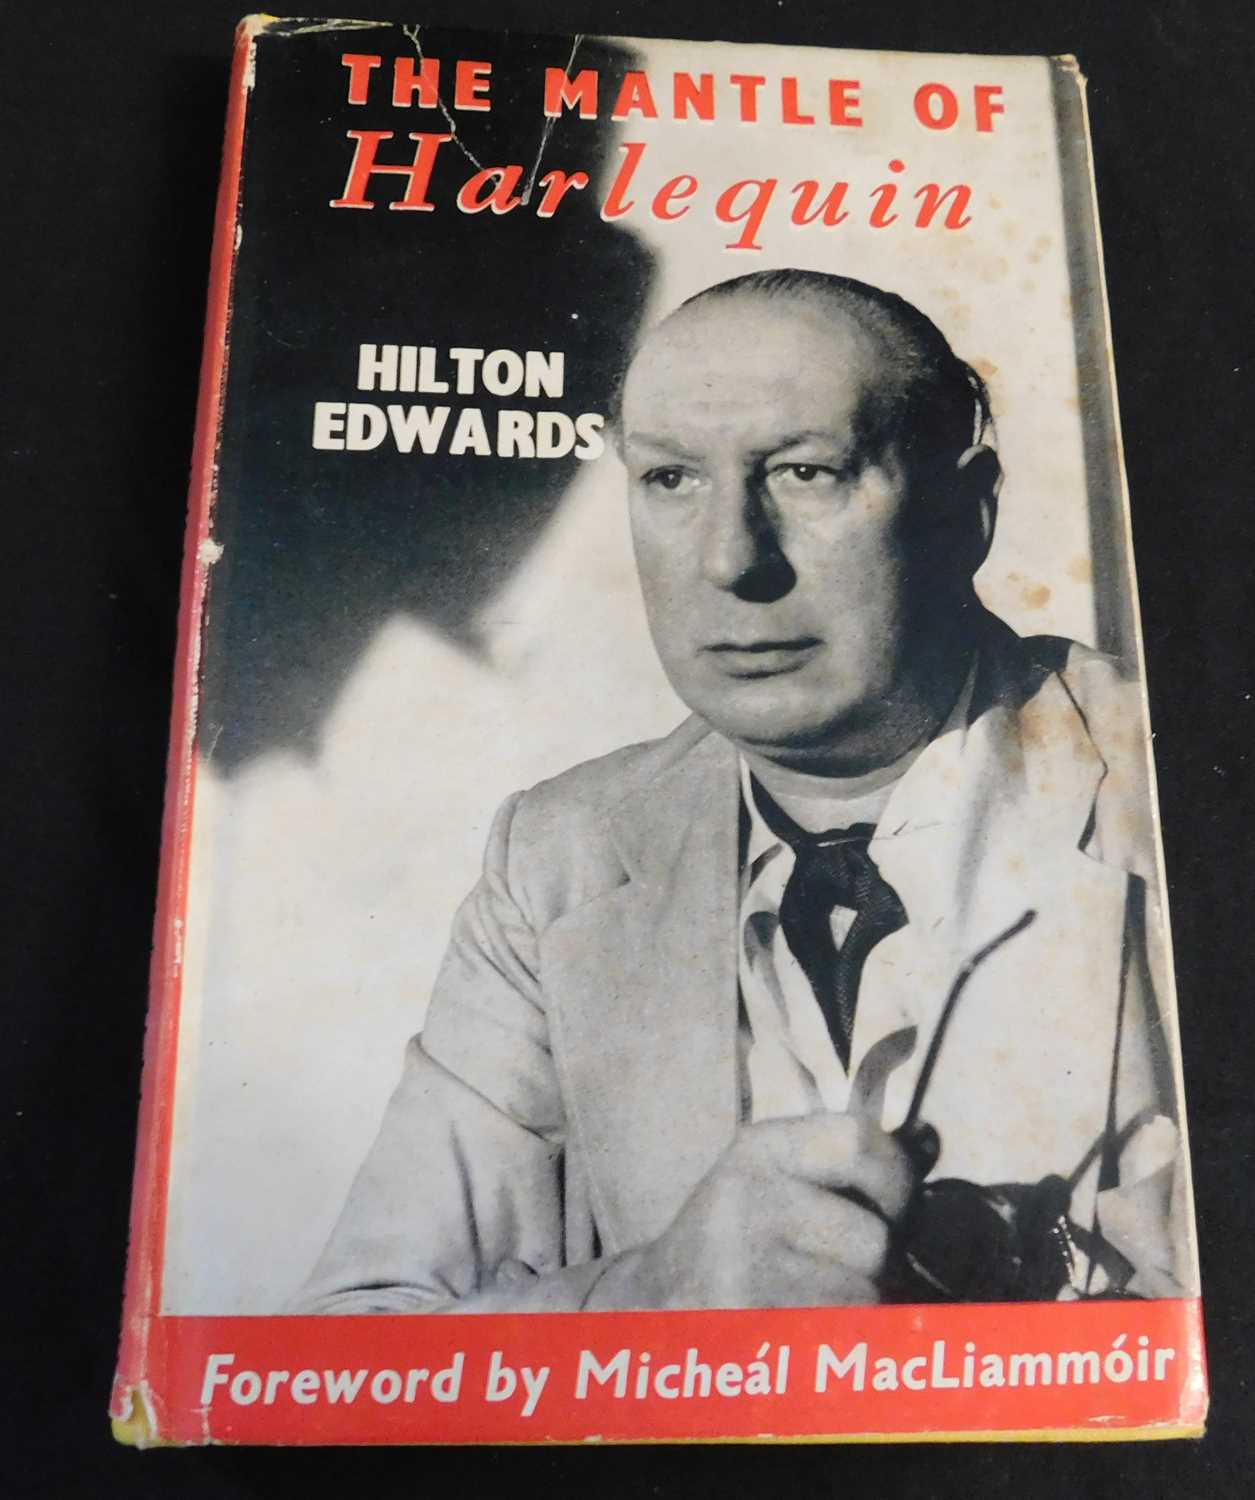 HILTON EDWARDS: THE MANTLE OF HARLEQUIN, Dublin, Progress House, 1958, 1st edition, signed and